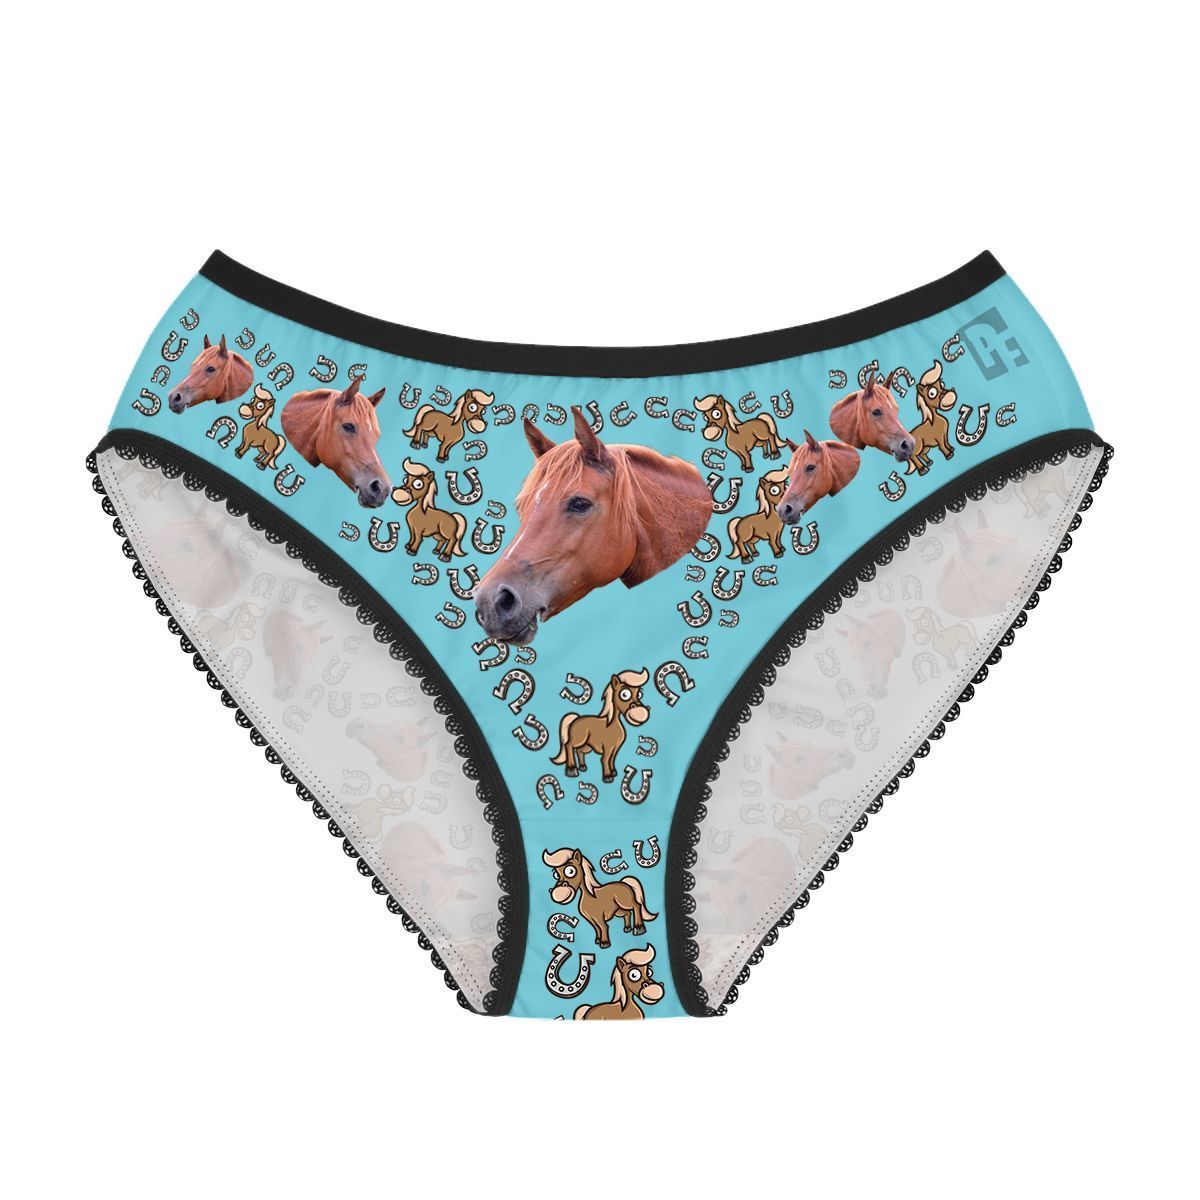 Blue Horse women's underwear briefs personalized with photo printed on them